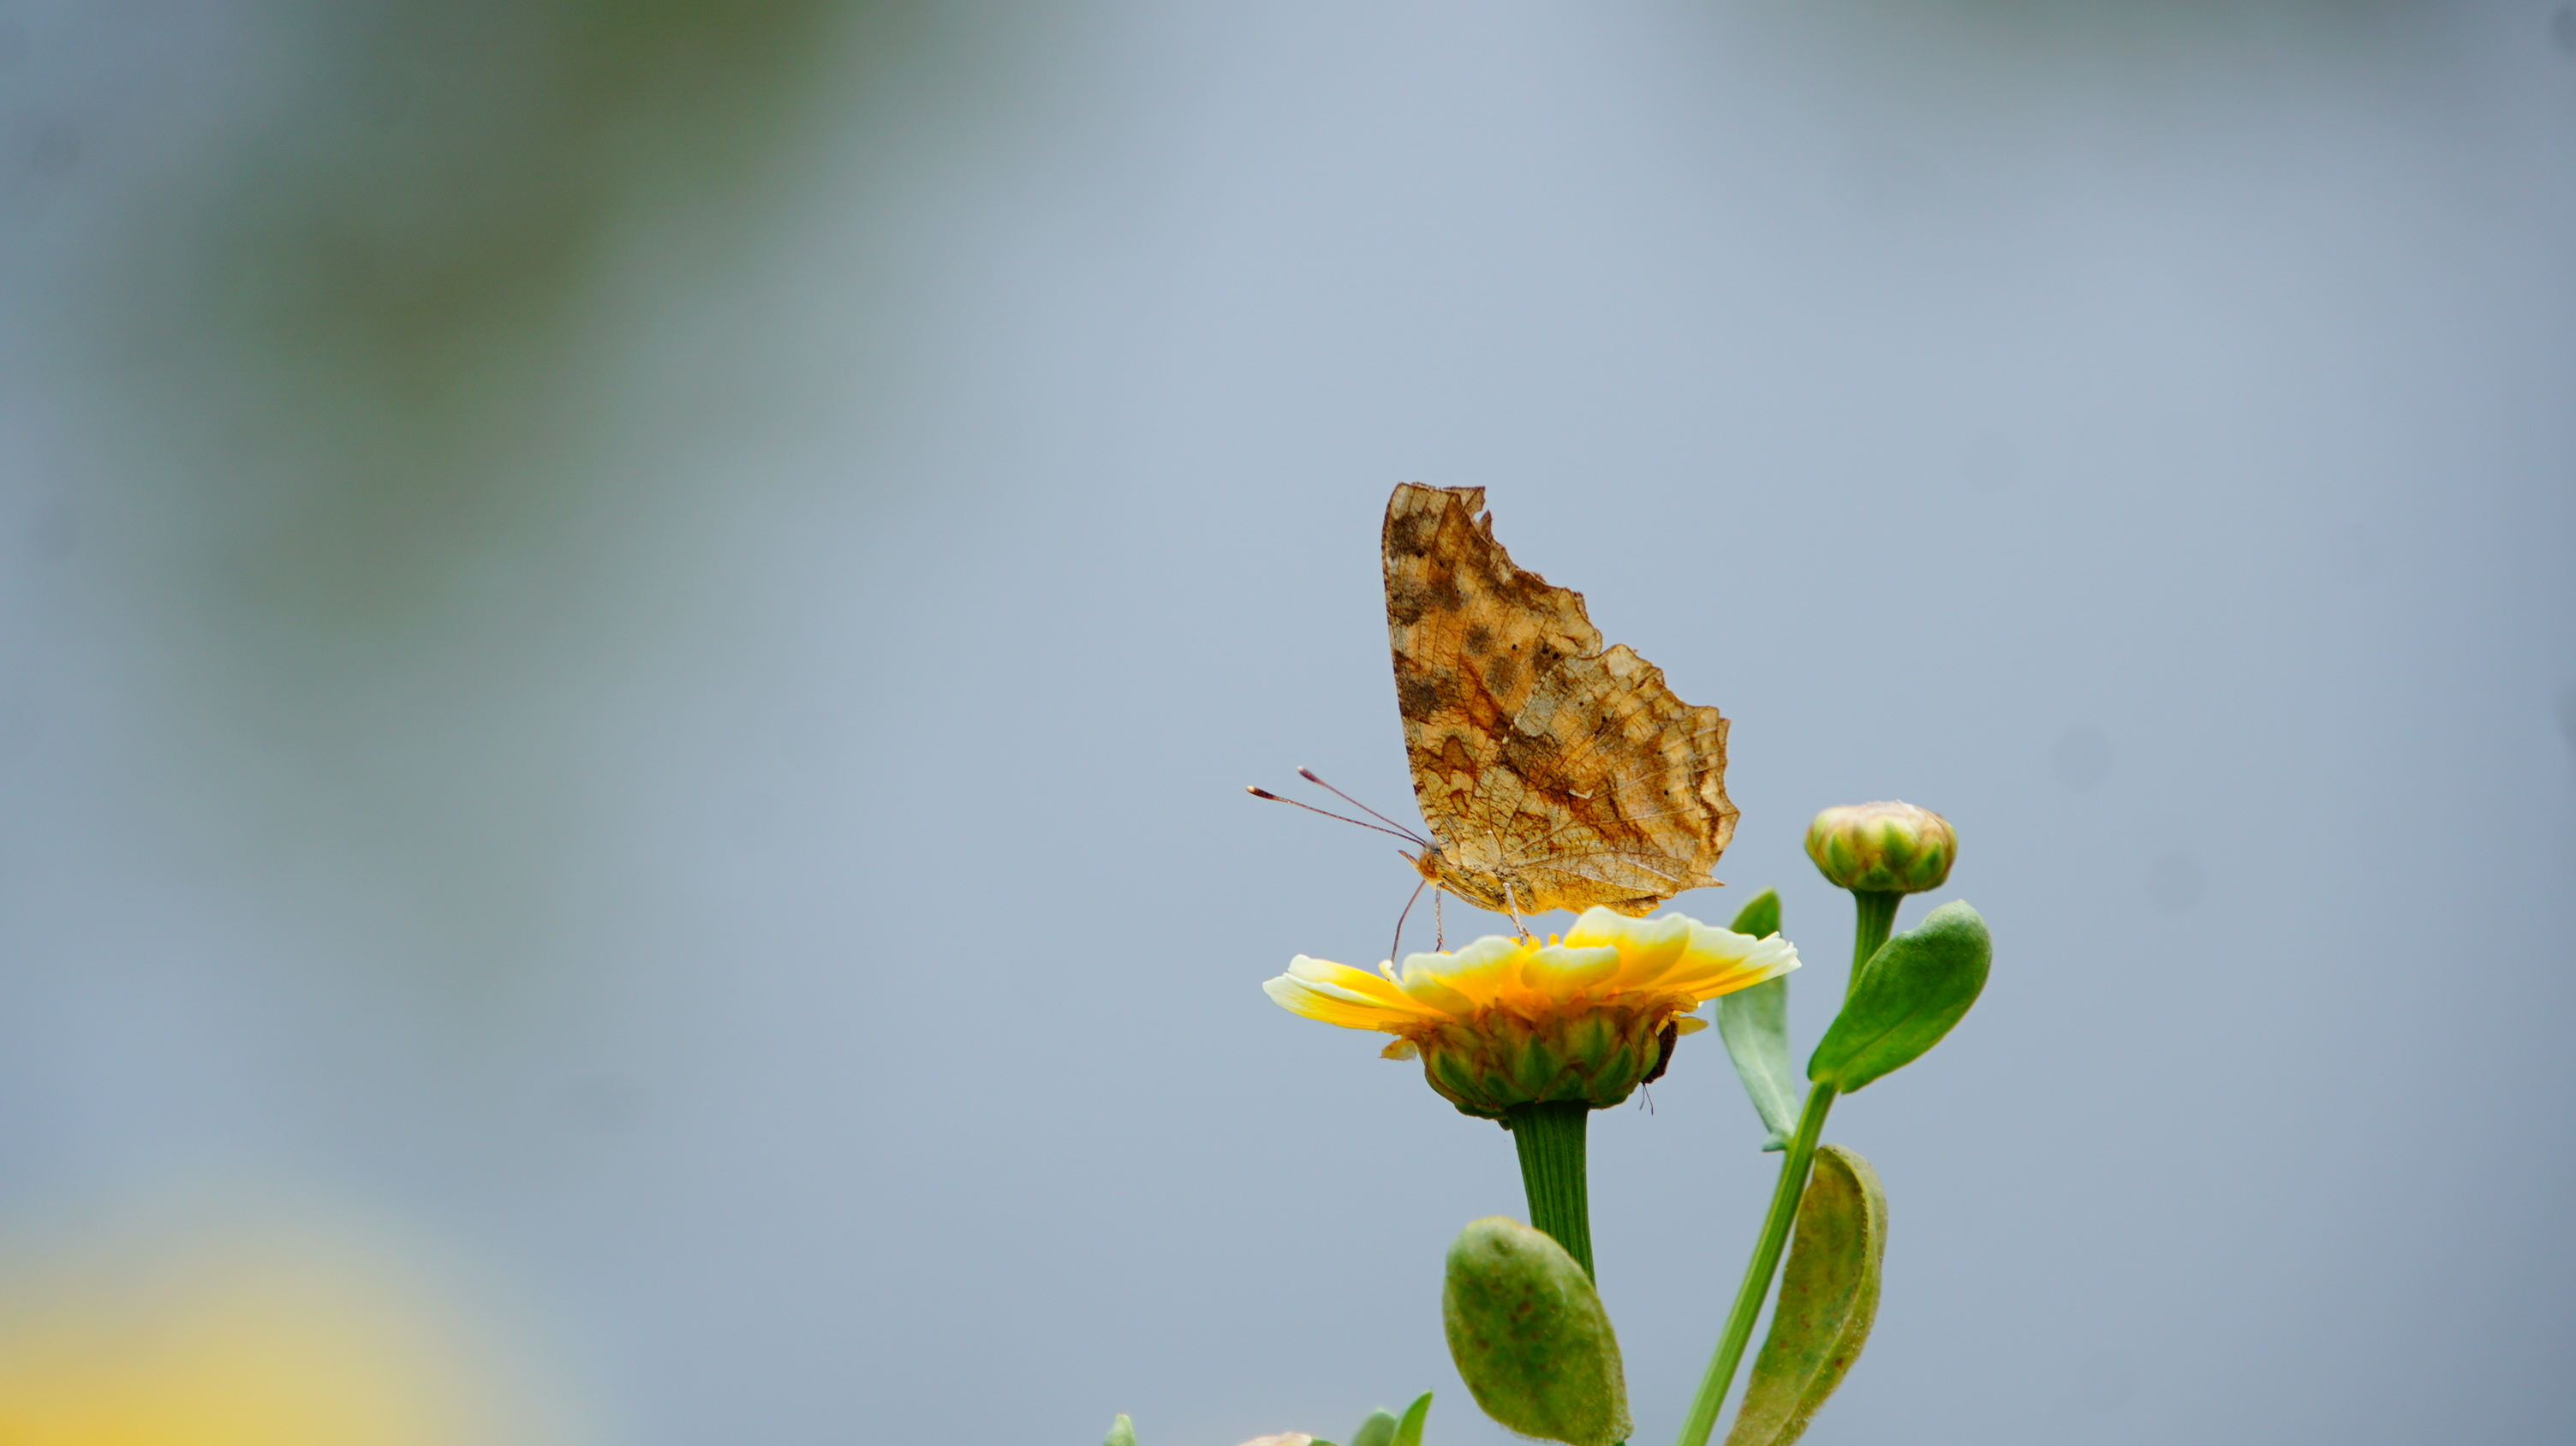 Animals Wildlife Nature Insect Butterfly Flowers Plants Minimalism Simple Background 3008x1688